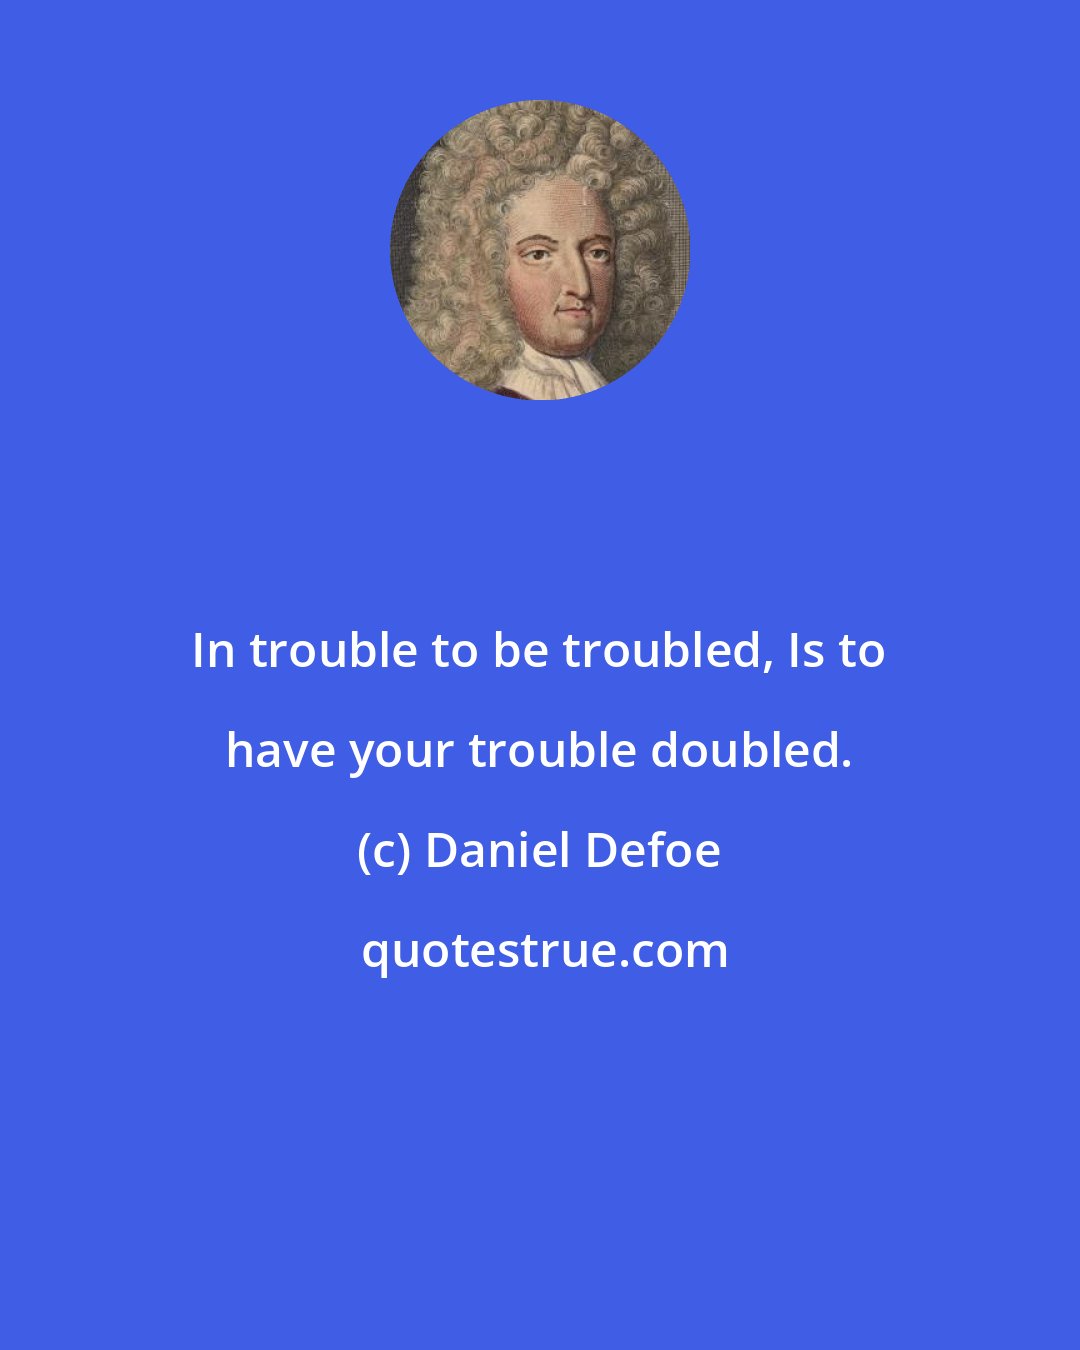 Daniel Defoe: In trouble to be troubled, Is to have your trouble doubled.